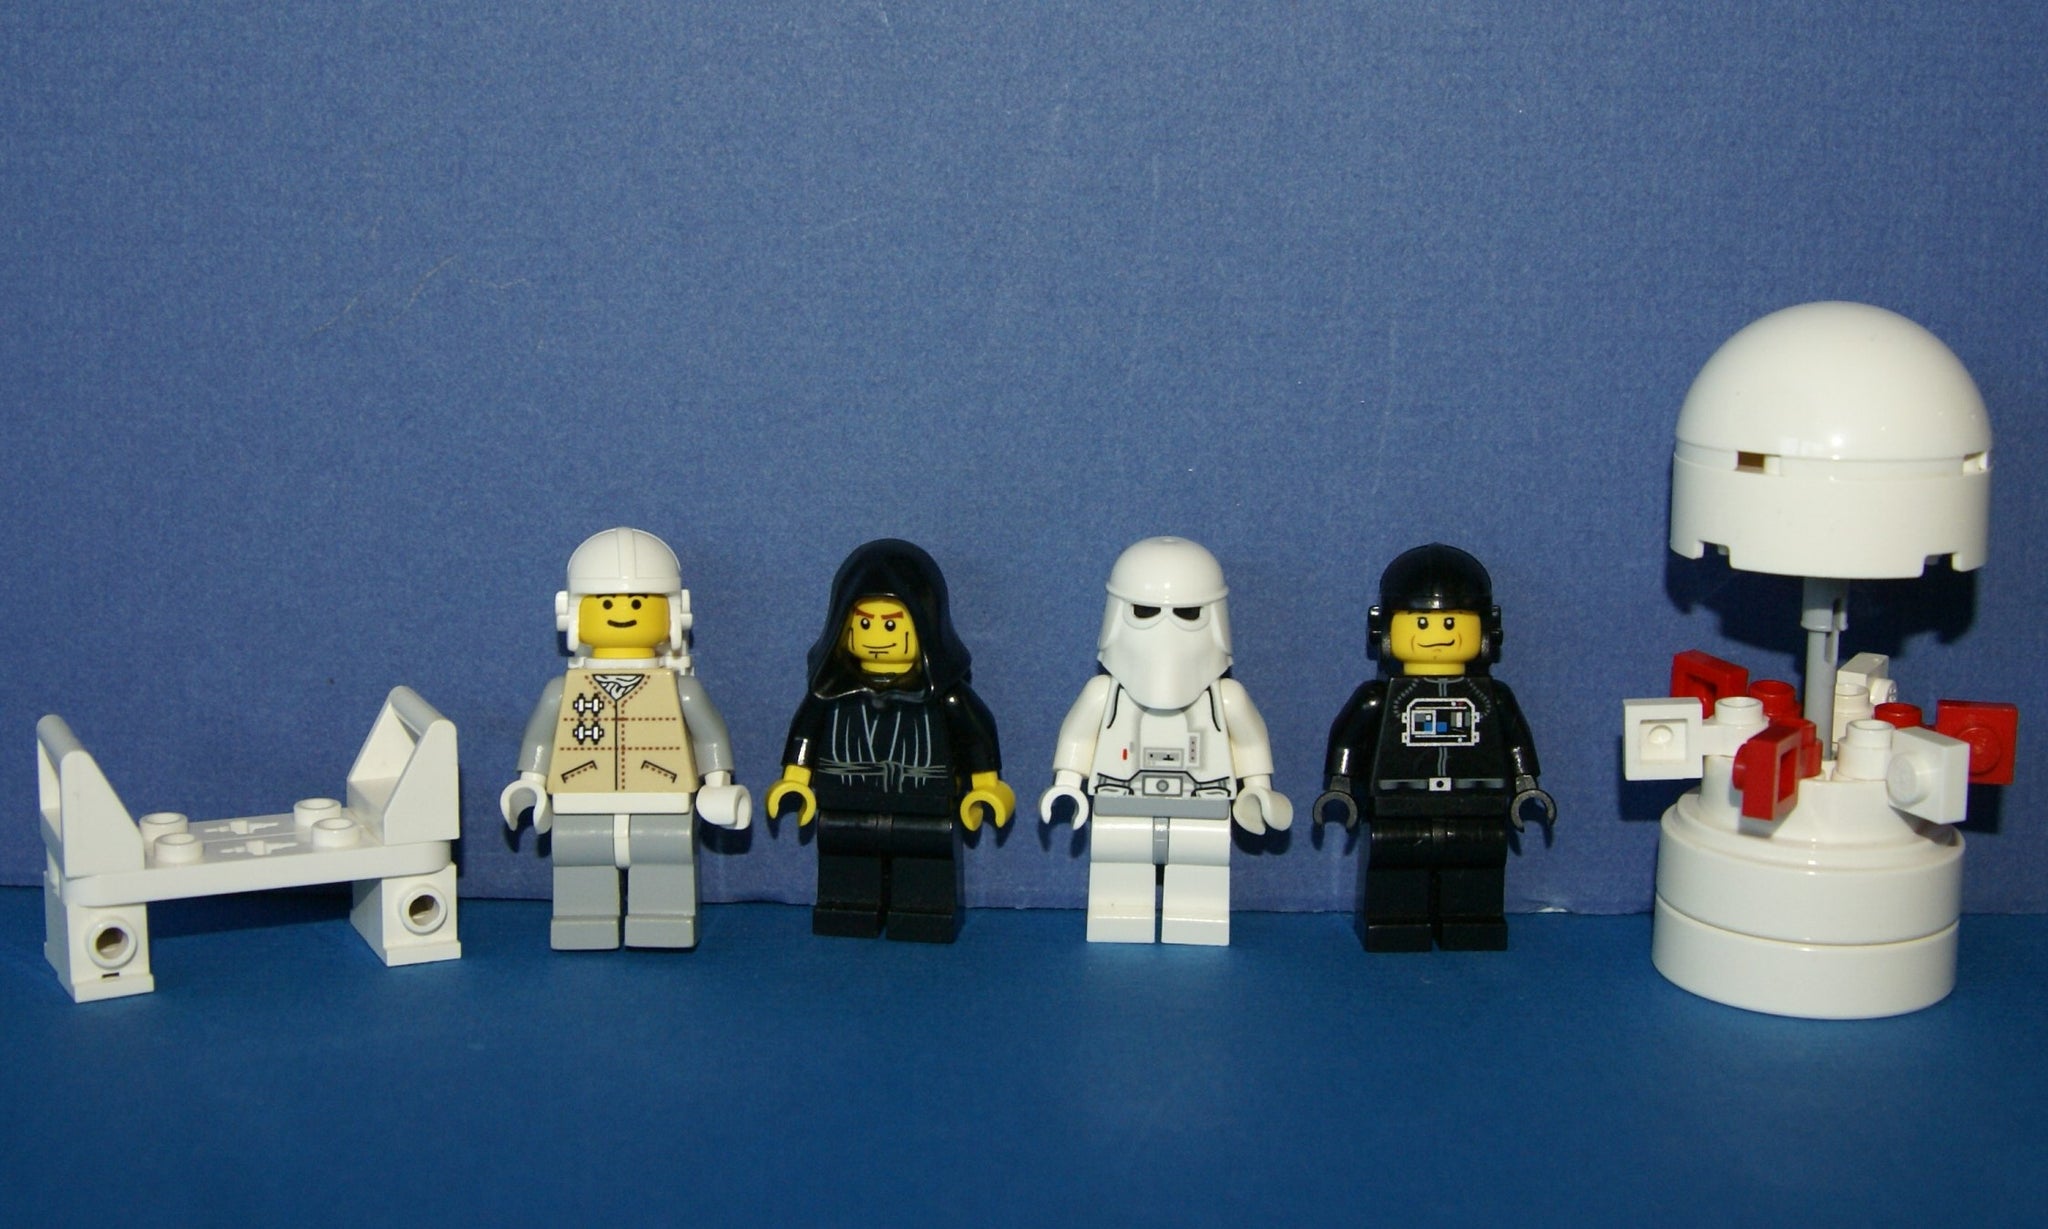 4 LEGO, NOW RARE, RETIRED MINIFIGURES COLLECTIBLES FROM STAR WARS